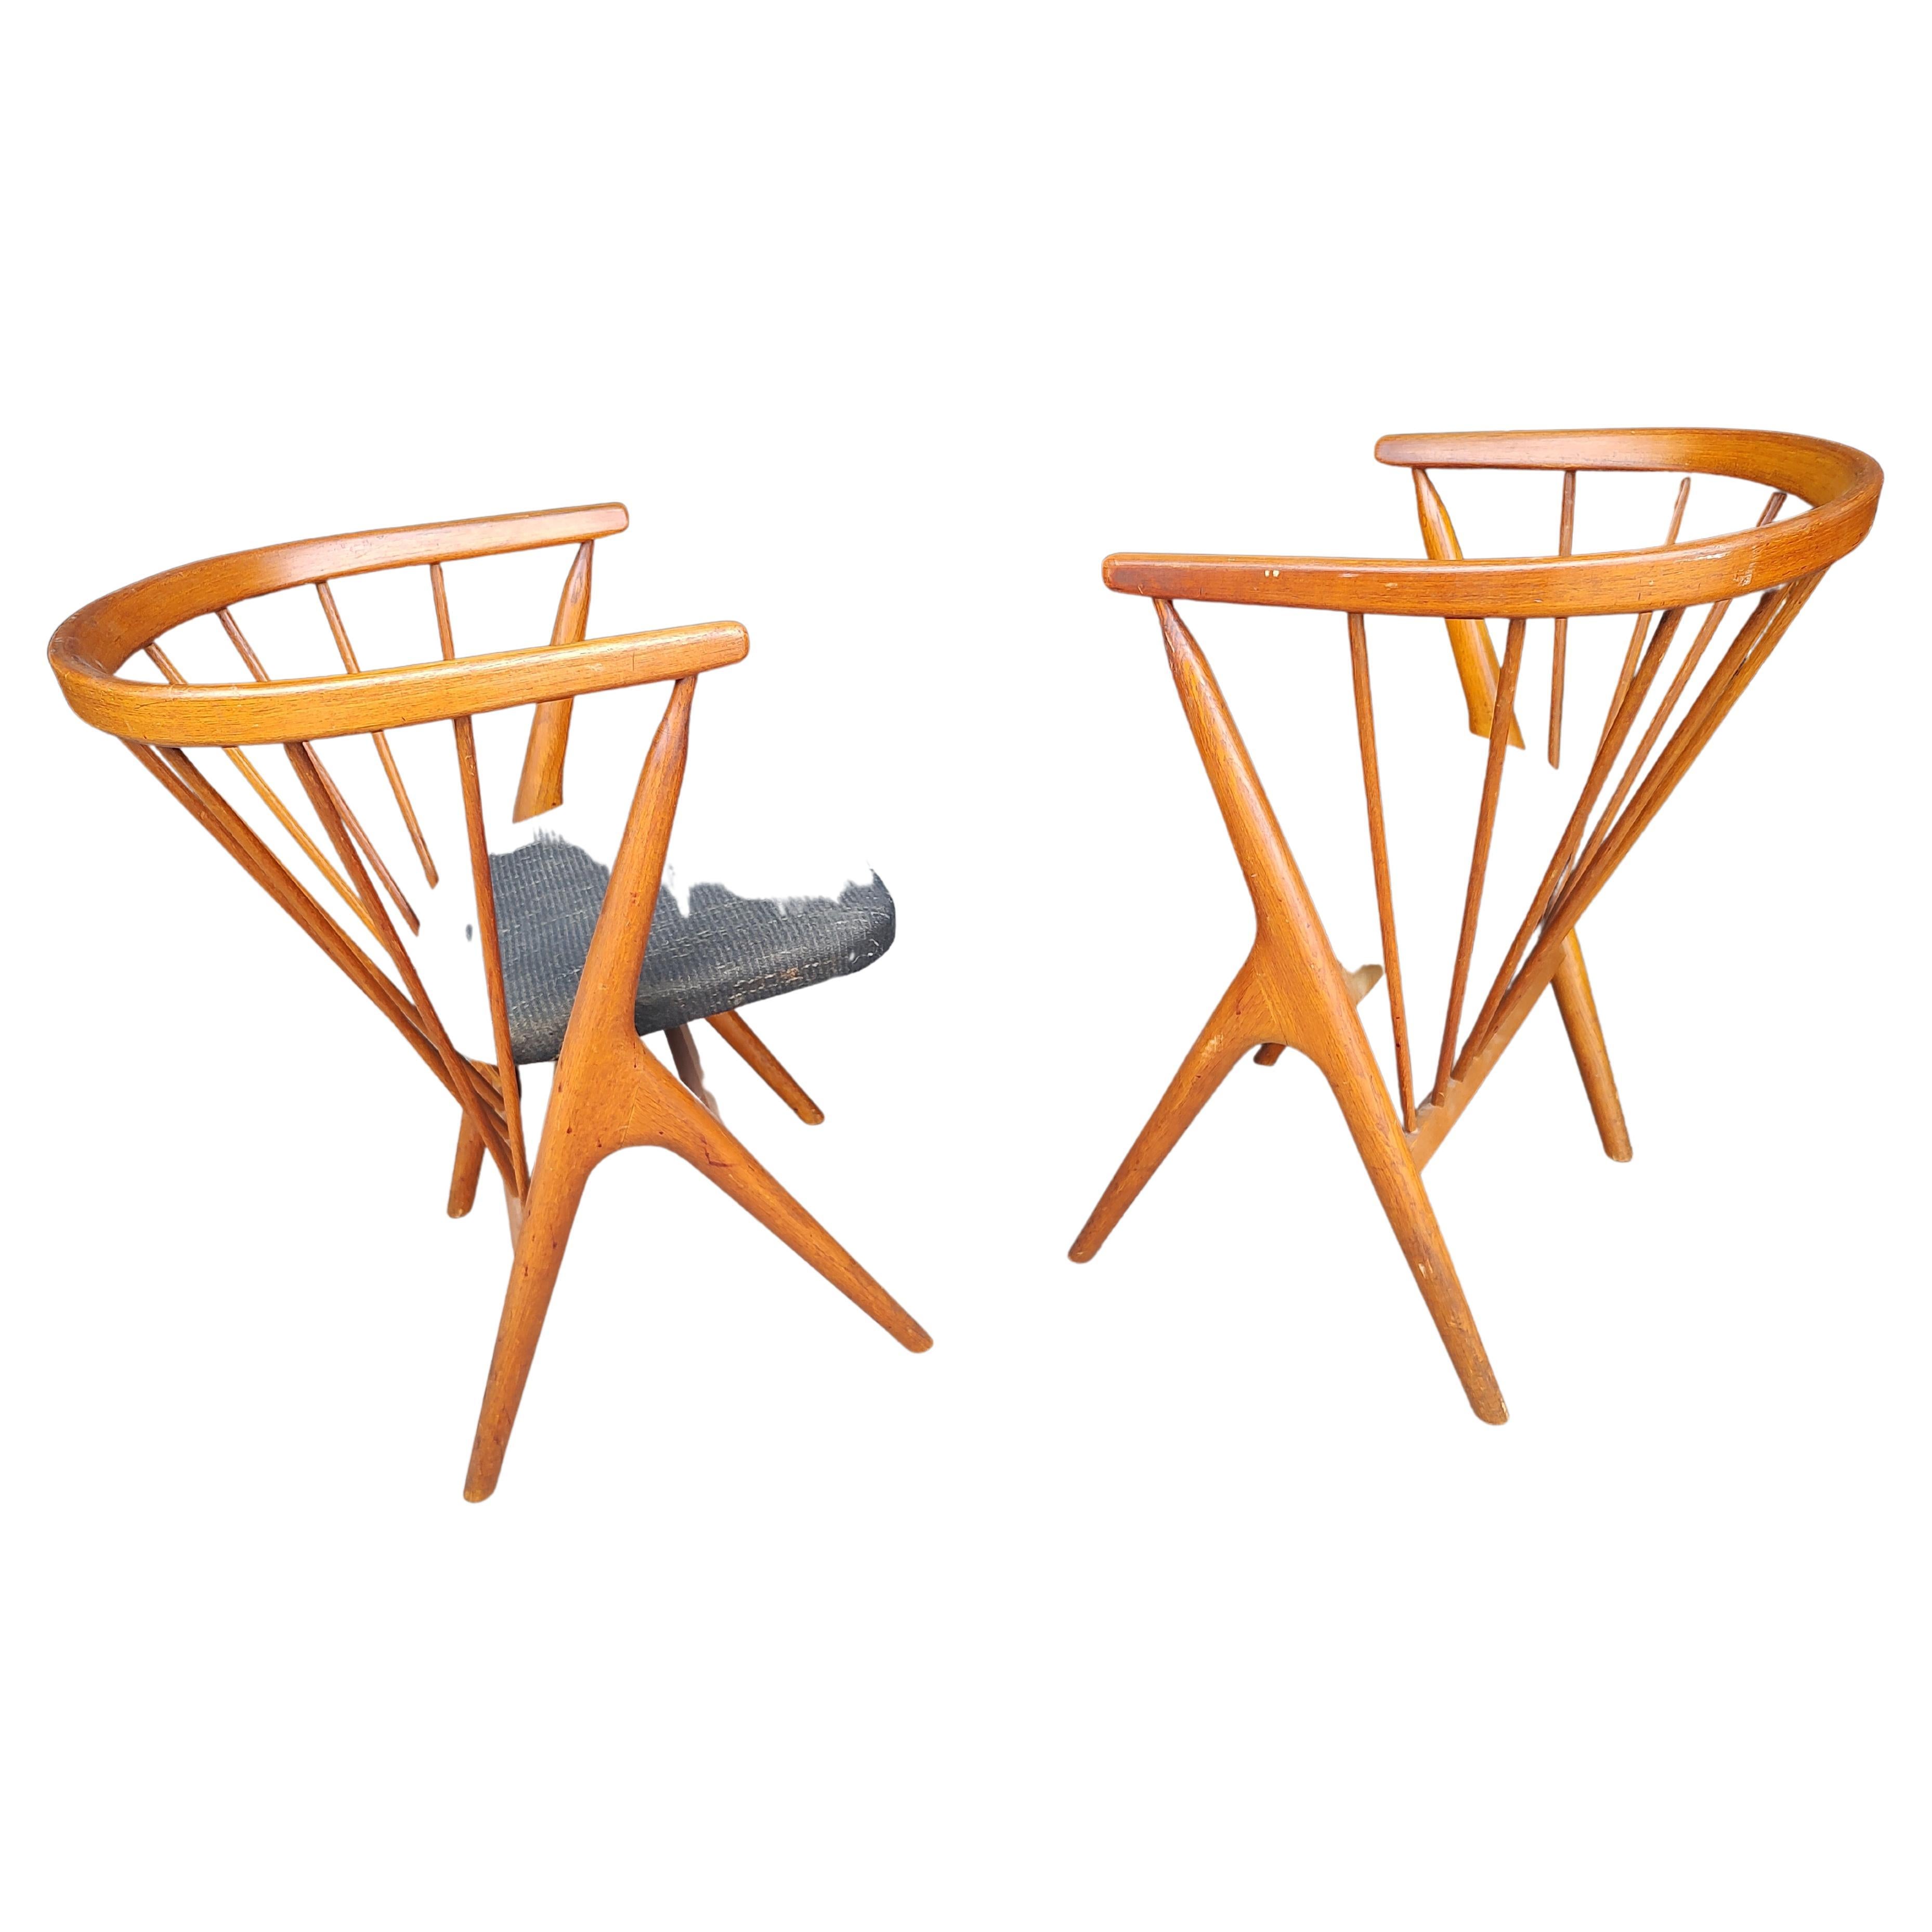 Danish Mid-Century Modern Sculptural Teak Set of 6 Dining Chairs #8 by Helge Sibast For Sale